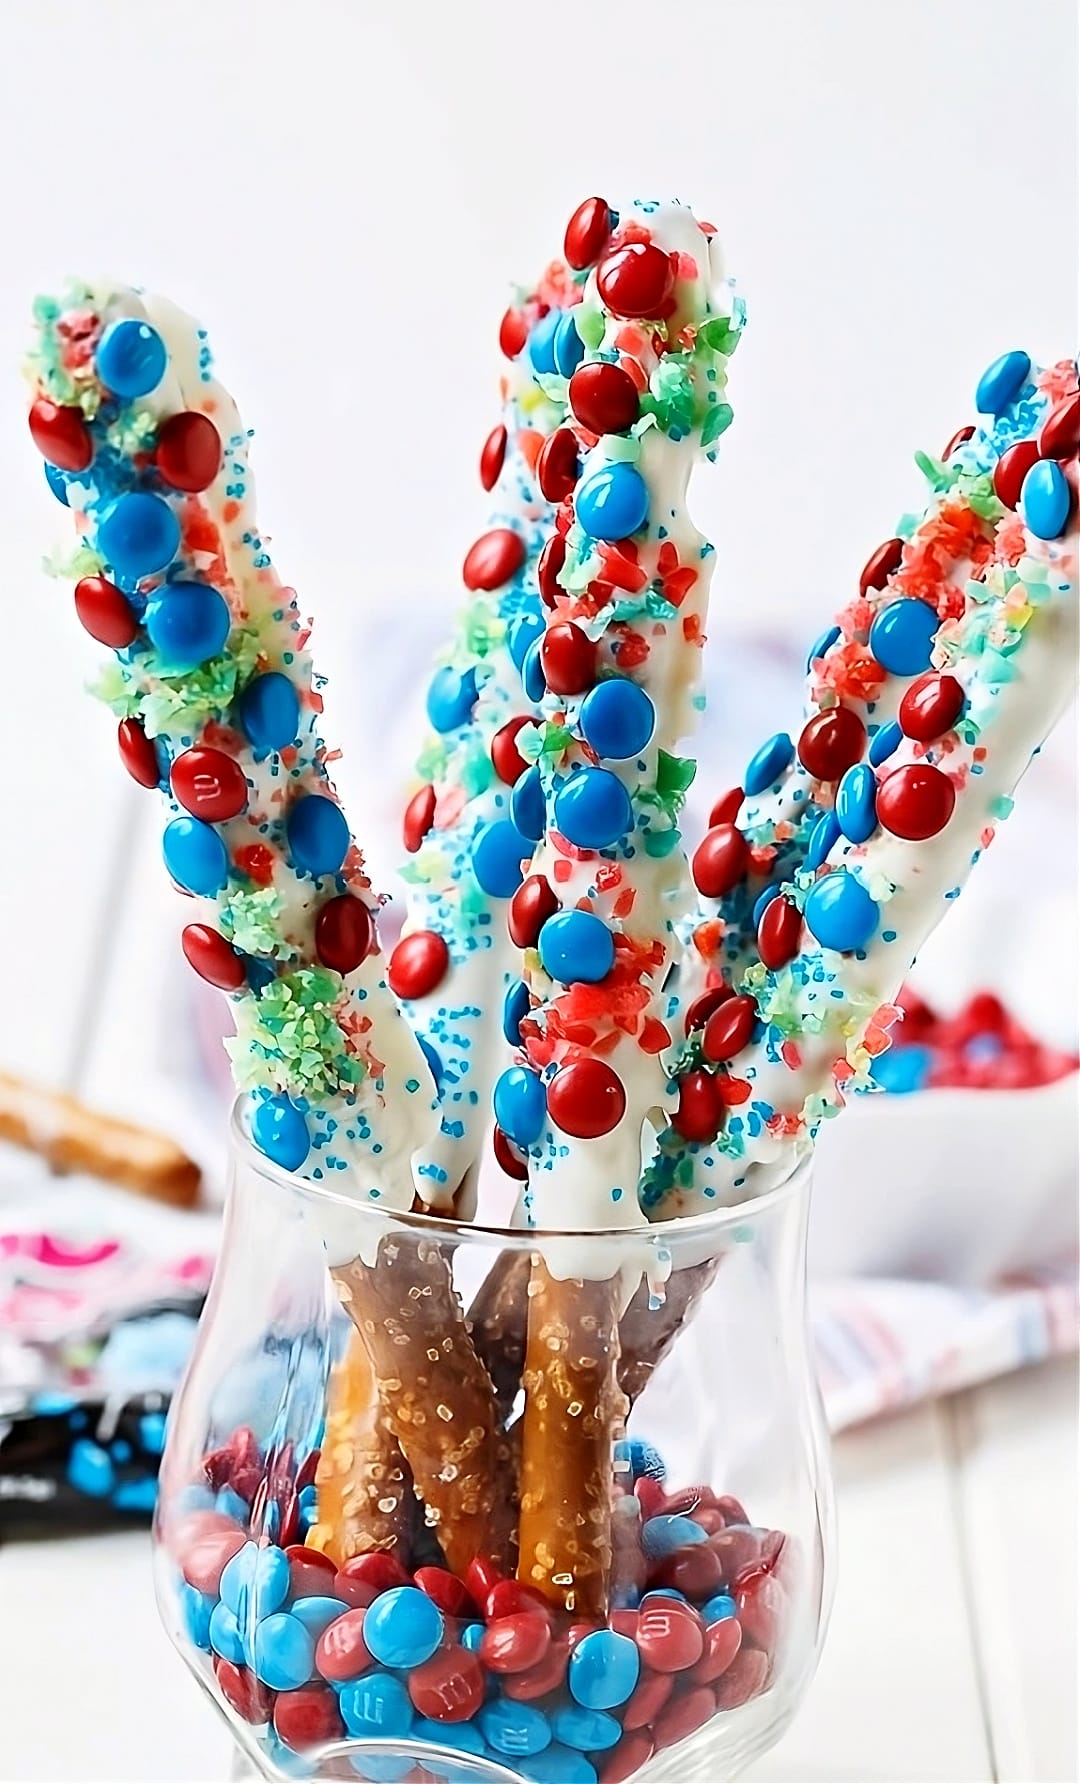 Pretzel rods coated in white chocolate and covered with sprinkles and m&ms.